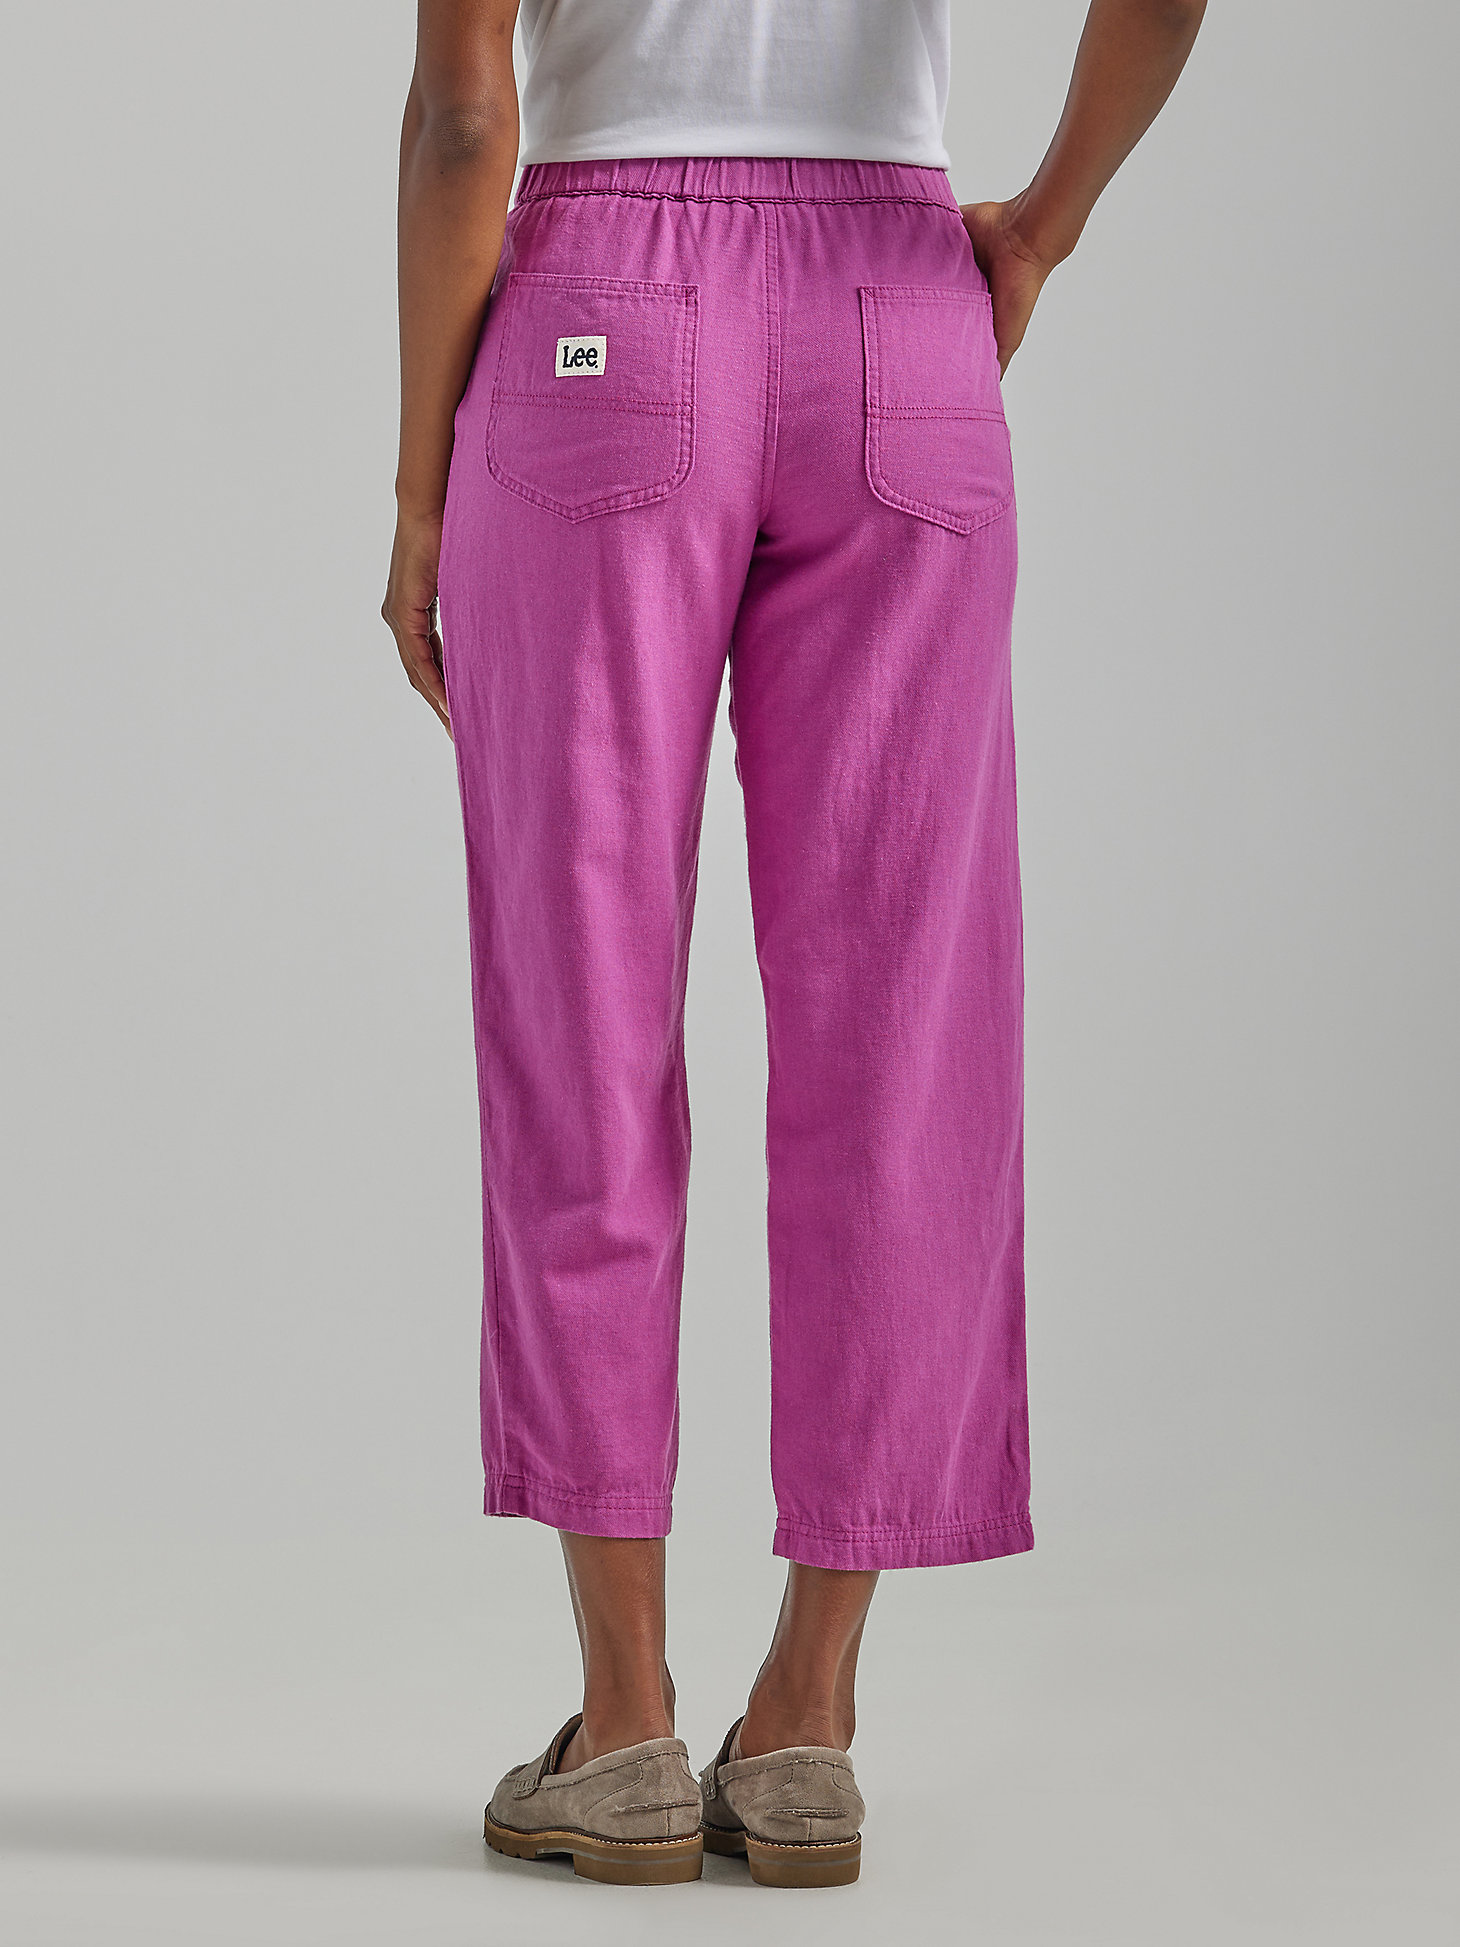 Women's Ultra Lux Pull-On Crop Pant in Grape Stain alternative view 1